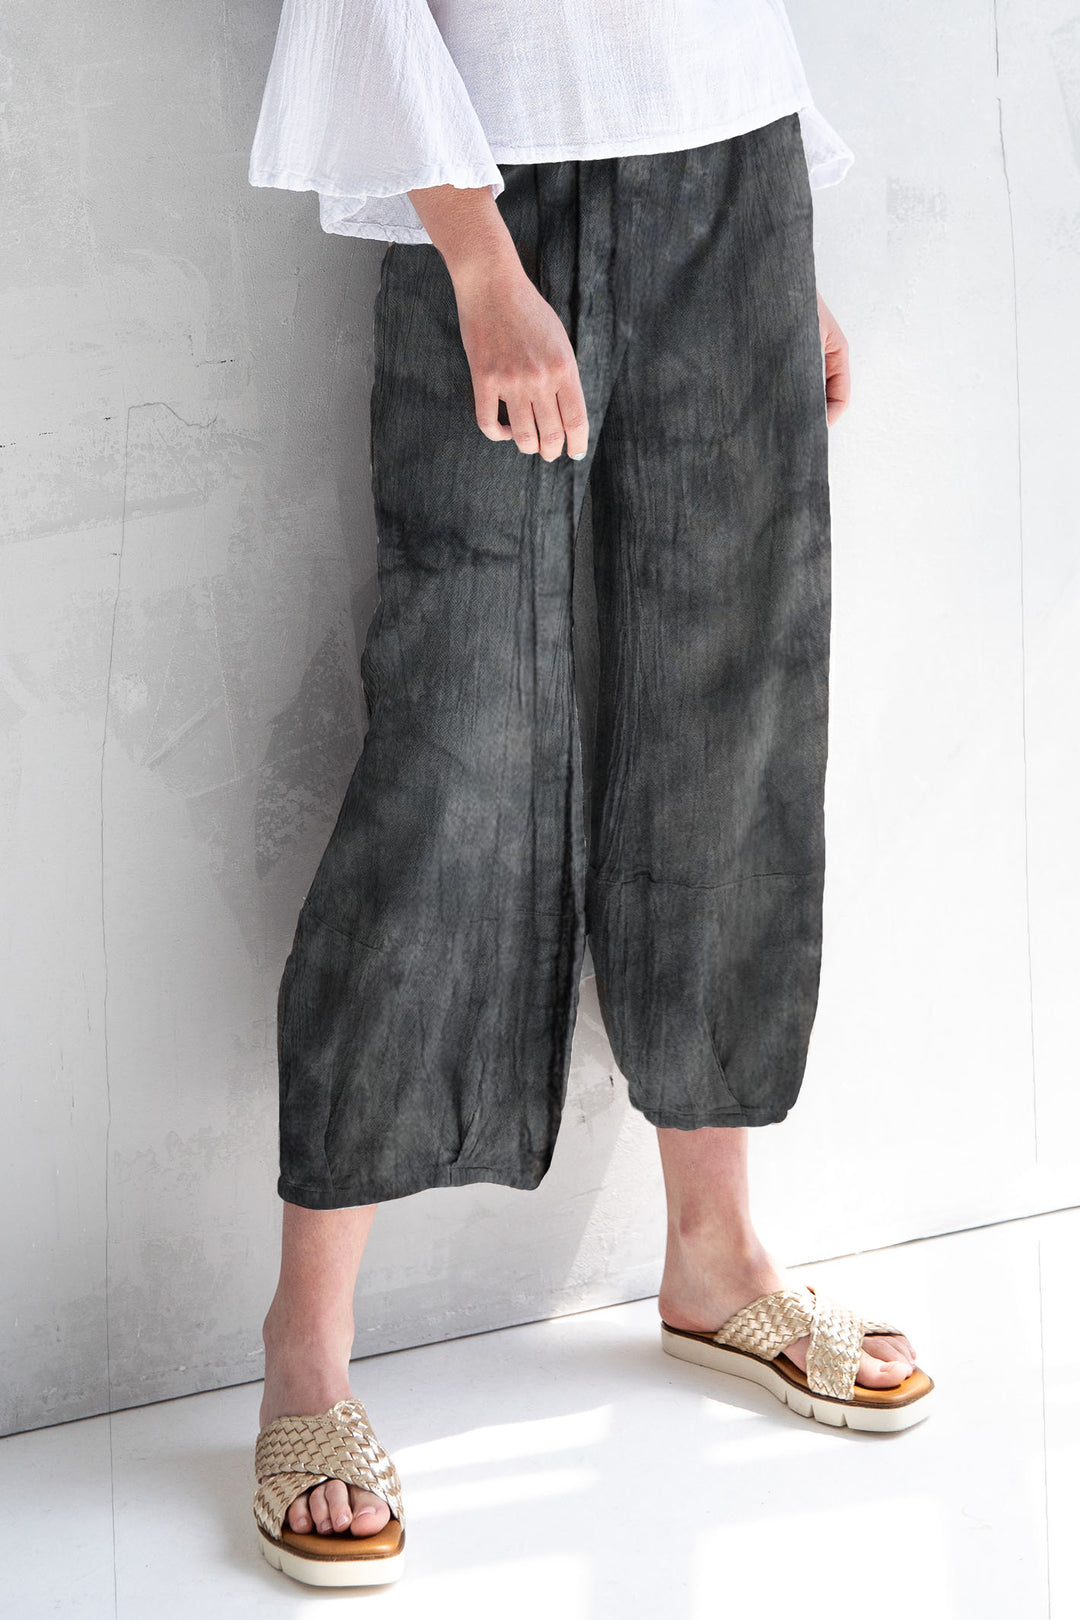 Onelife P468 Grey Marbled 100% Cotton Savannah Pants - Experience Boutique